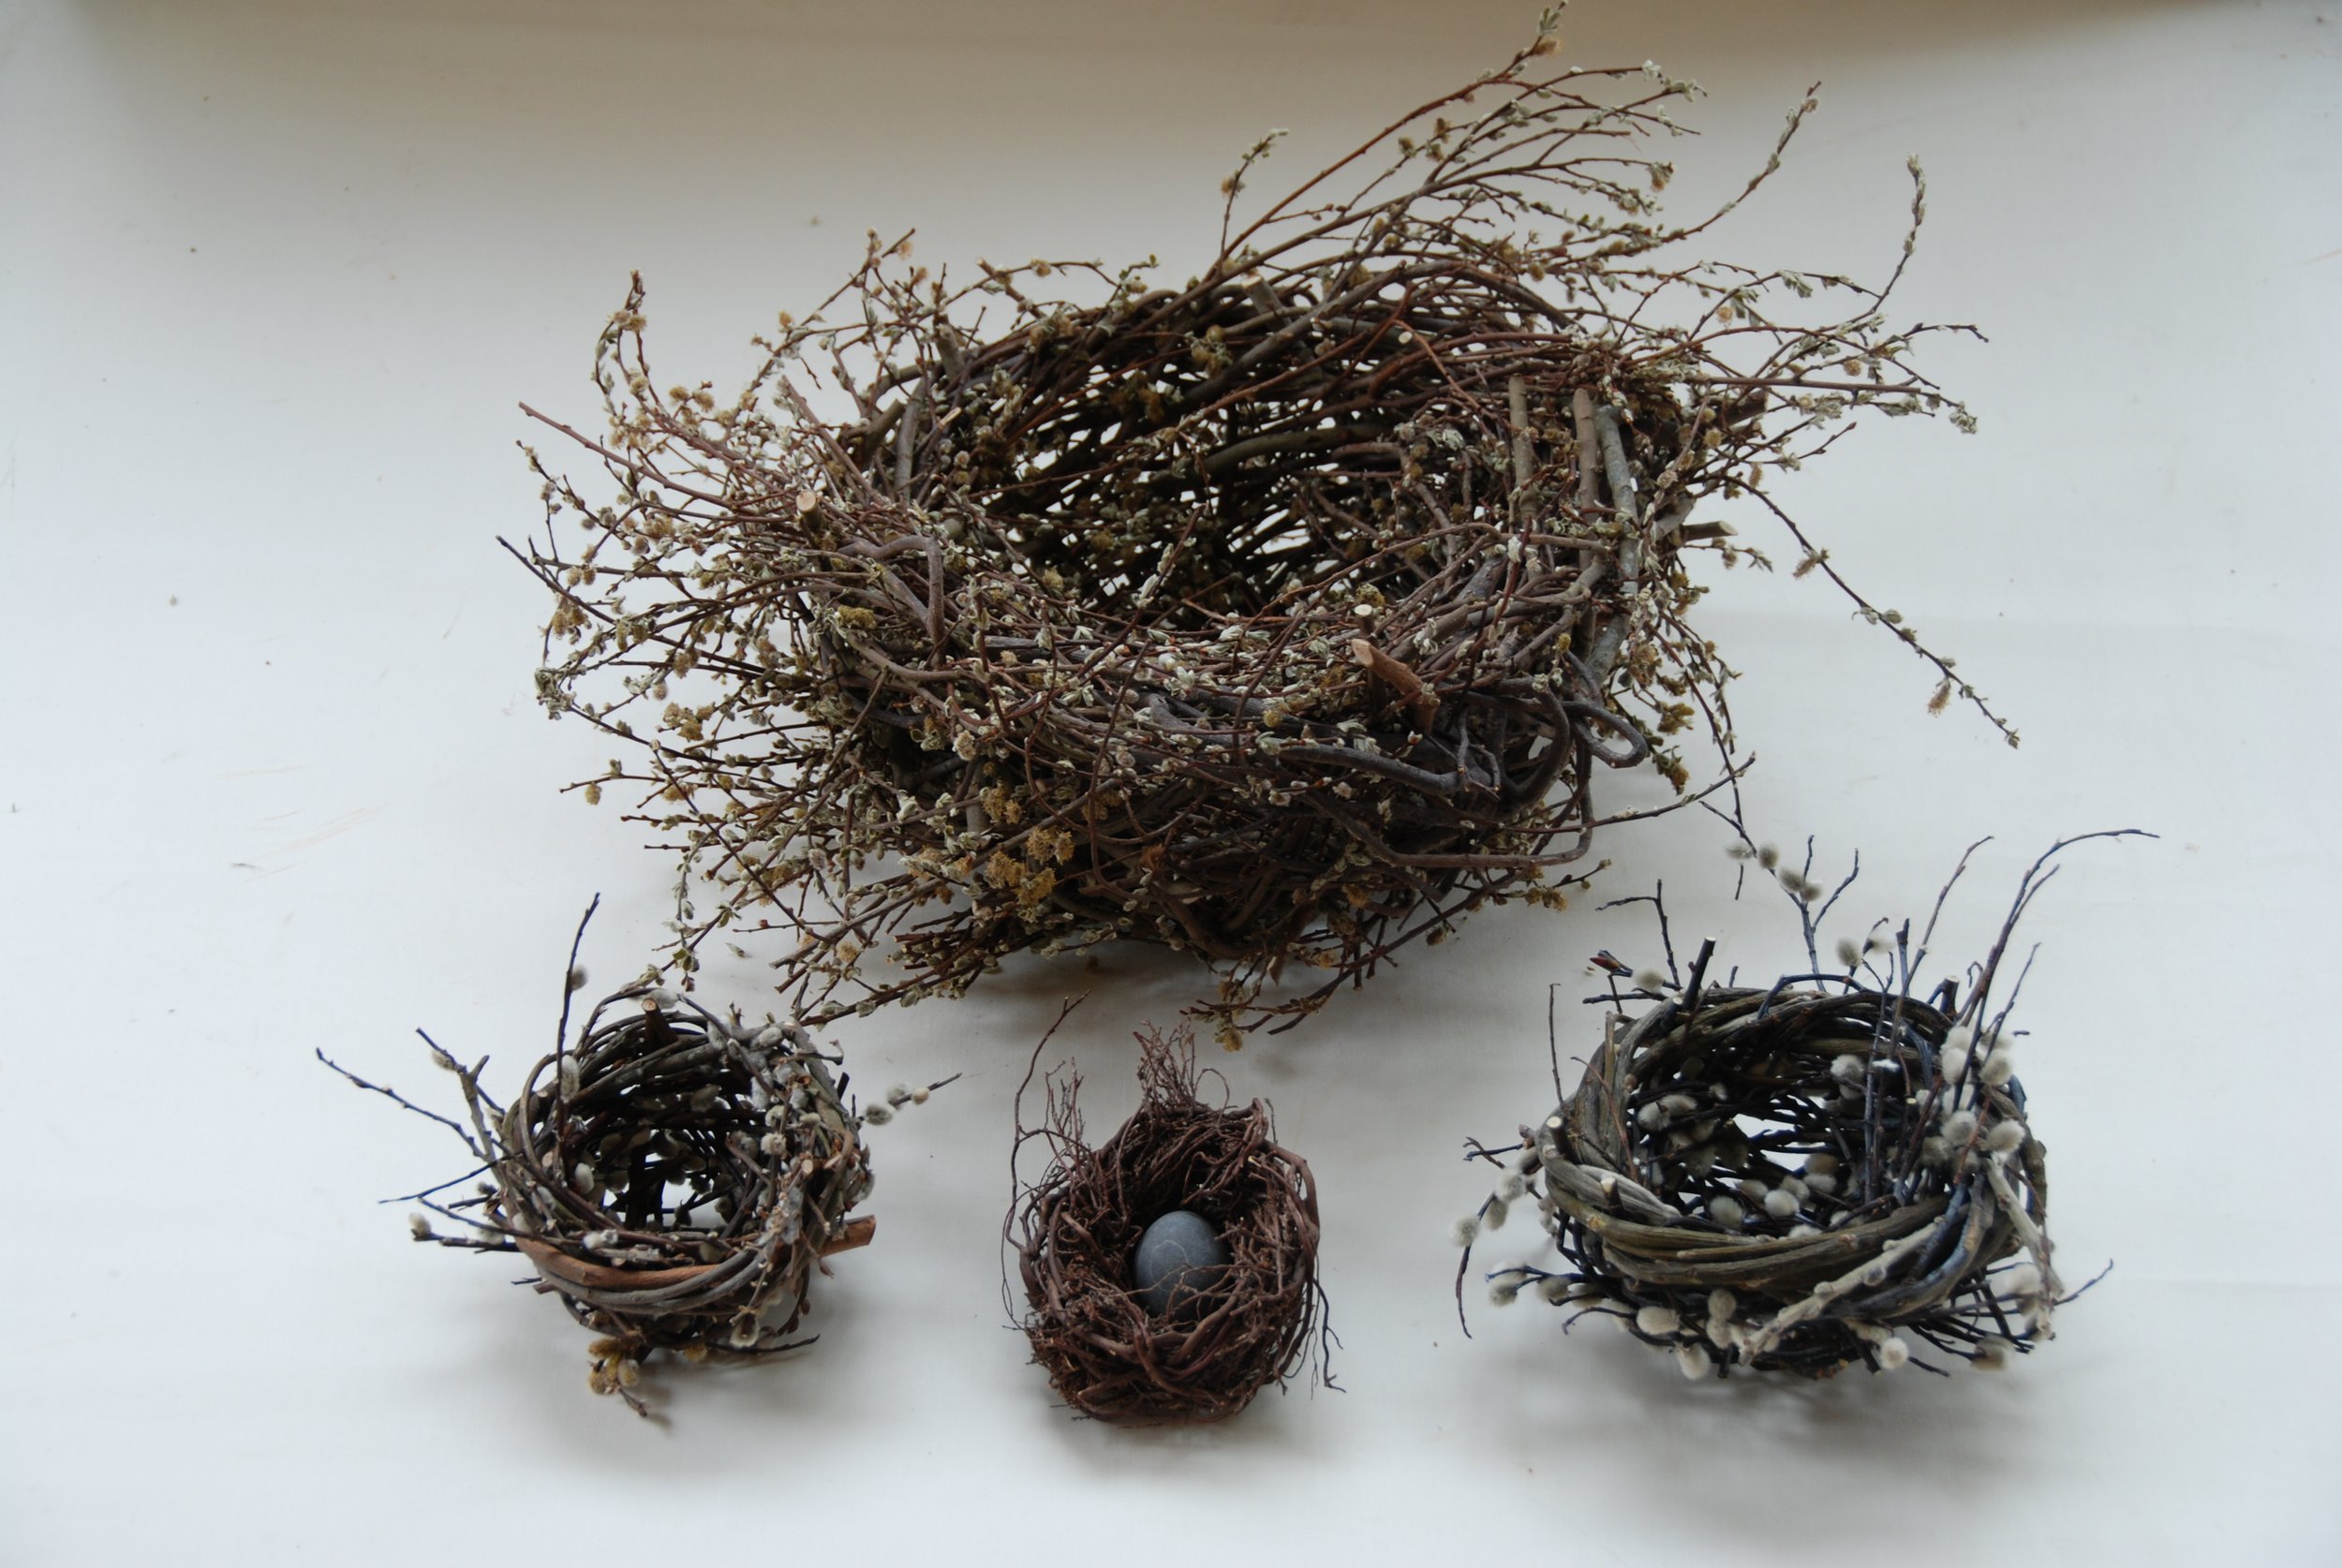 012 nest group, catkinned willow and small heather nest.JPG